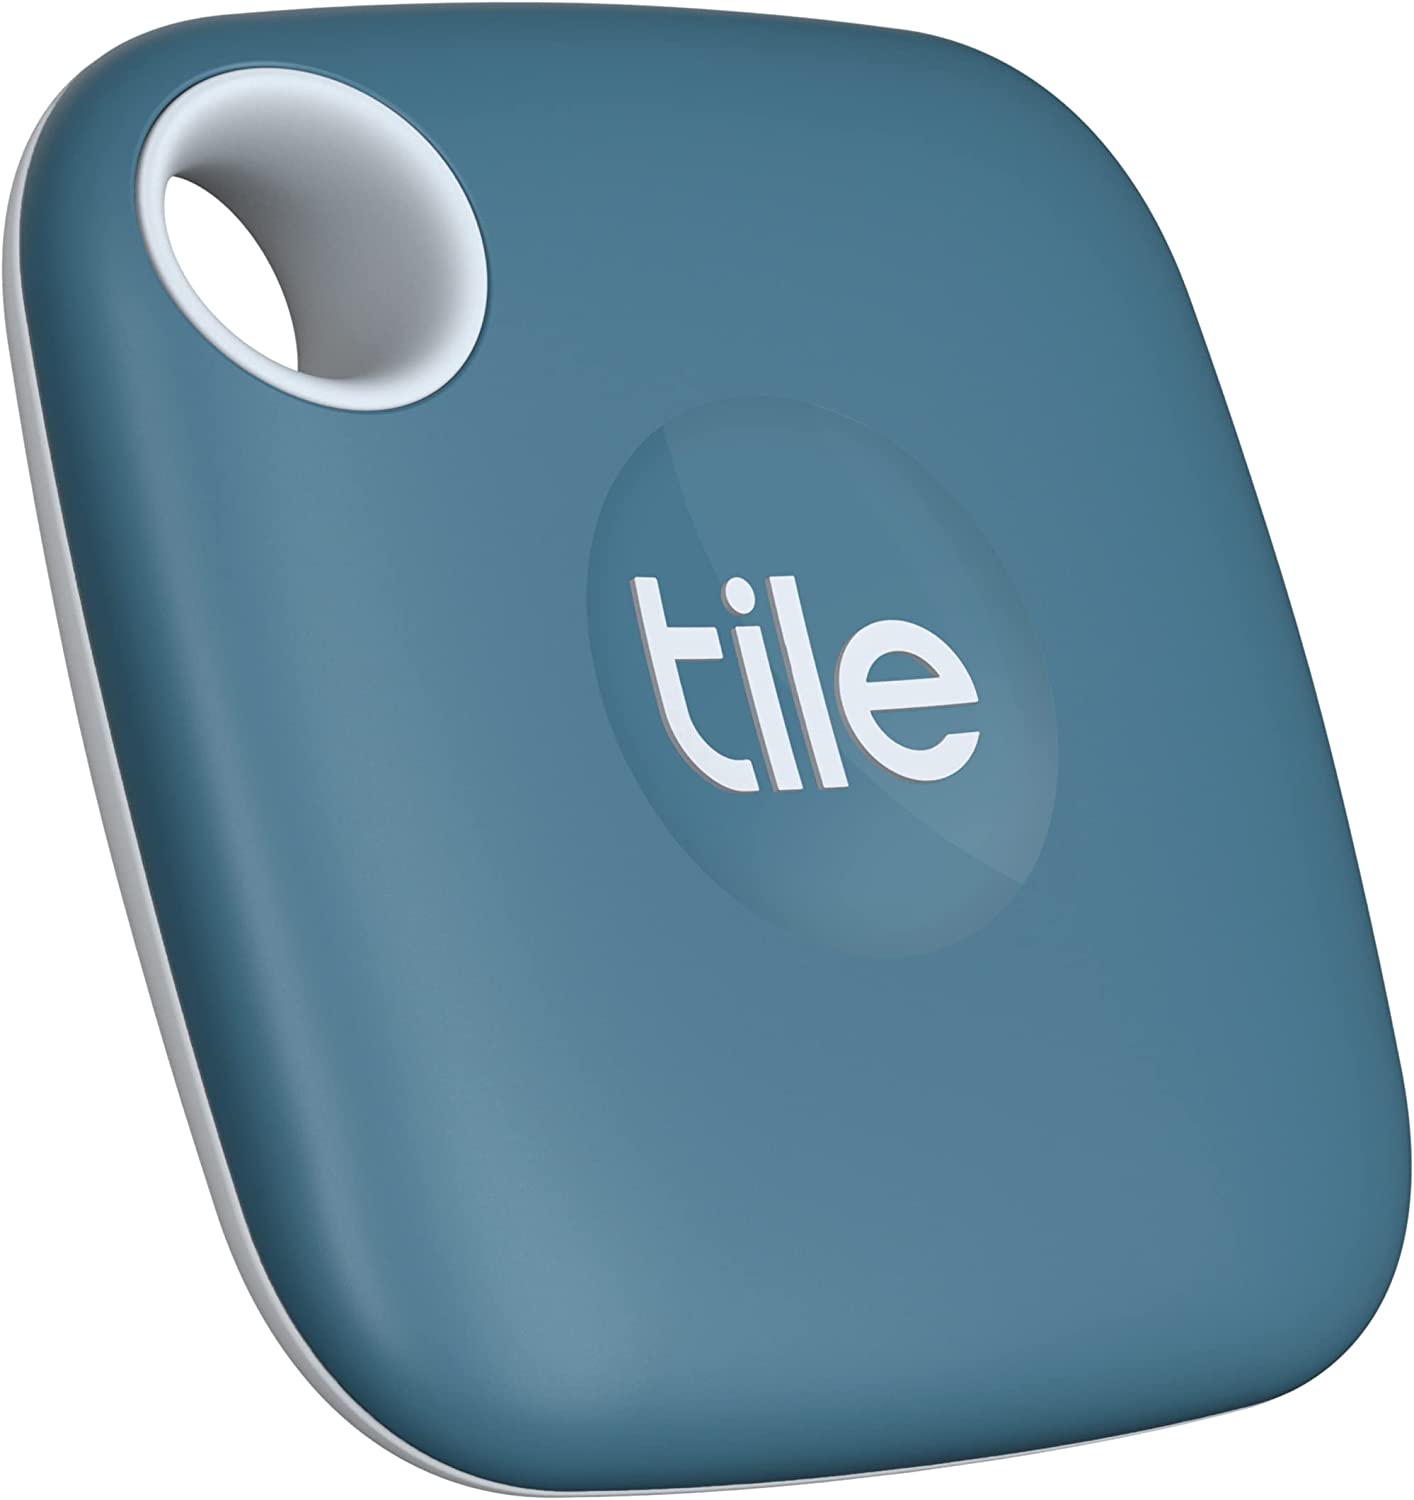 Tile Mate / Tile Starter 2022, Bluetooth Tracker, Keys Finder and Item Up to 250 ft. Range. Up to 3 Year Water-Resistant. Phone Finder. iOS and Android | Lazada Singapore